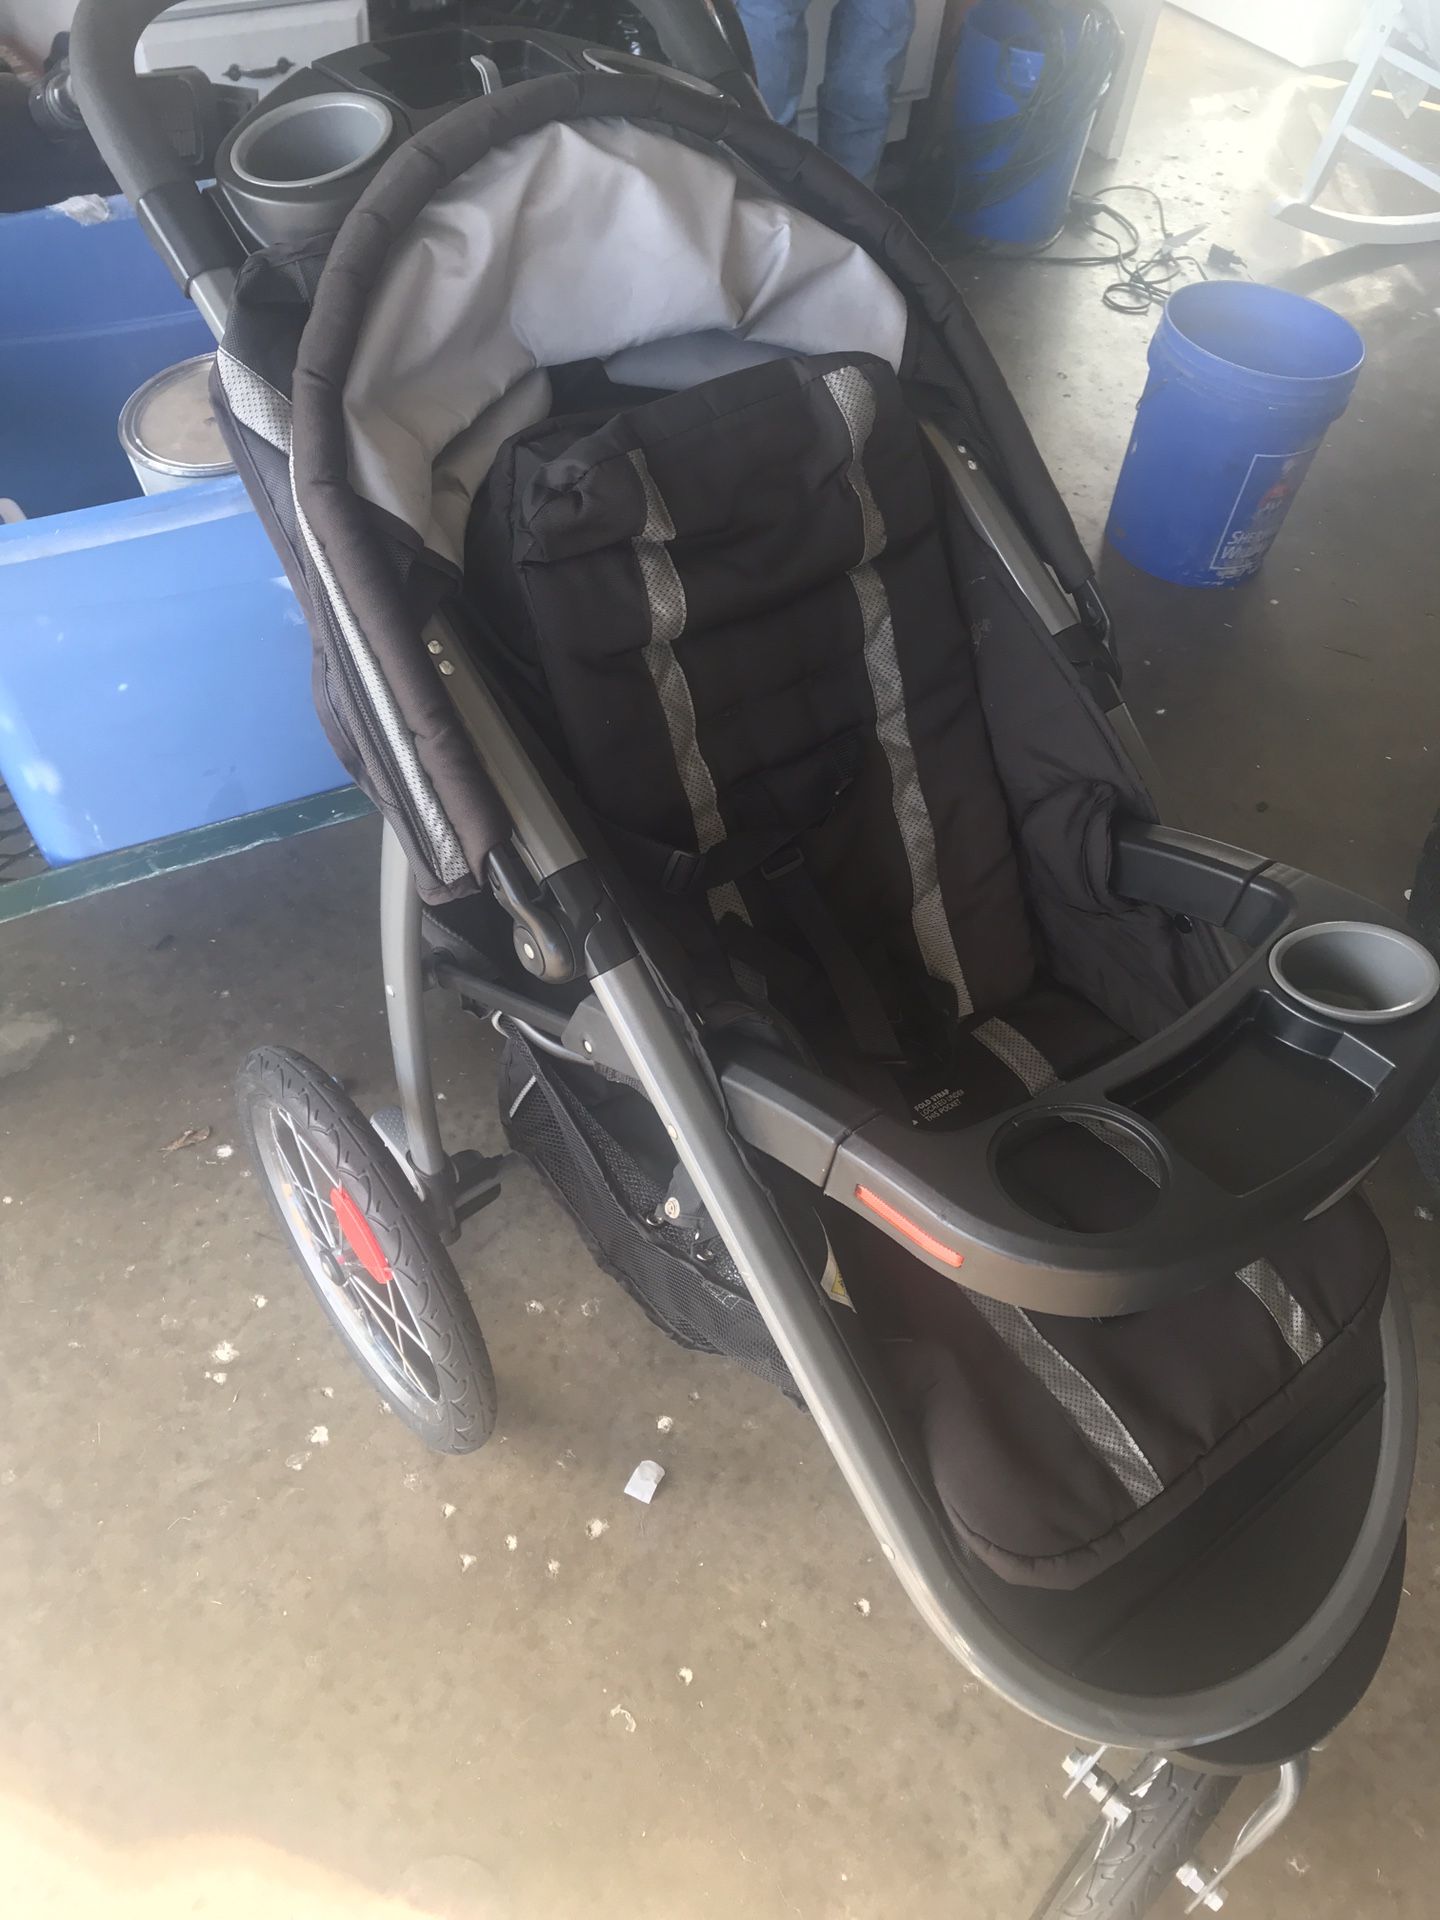 Graco Jogger Stroller- Car seat/Base Combo or Separate